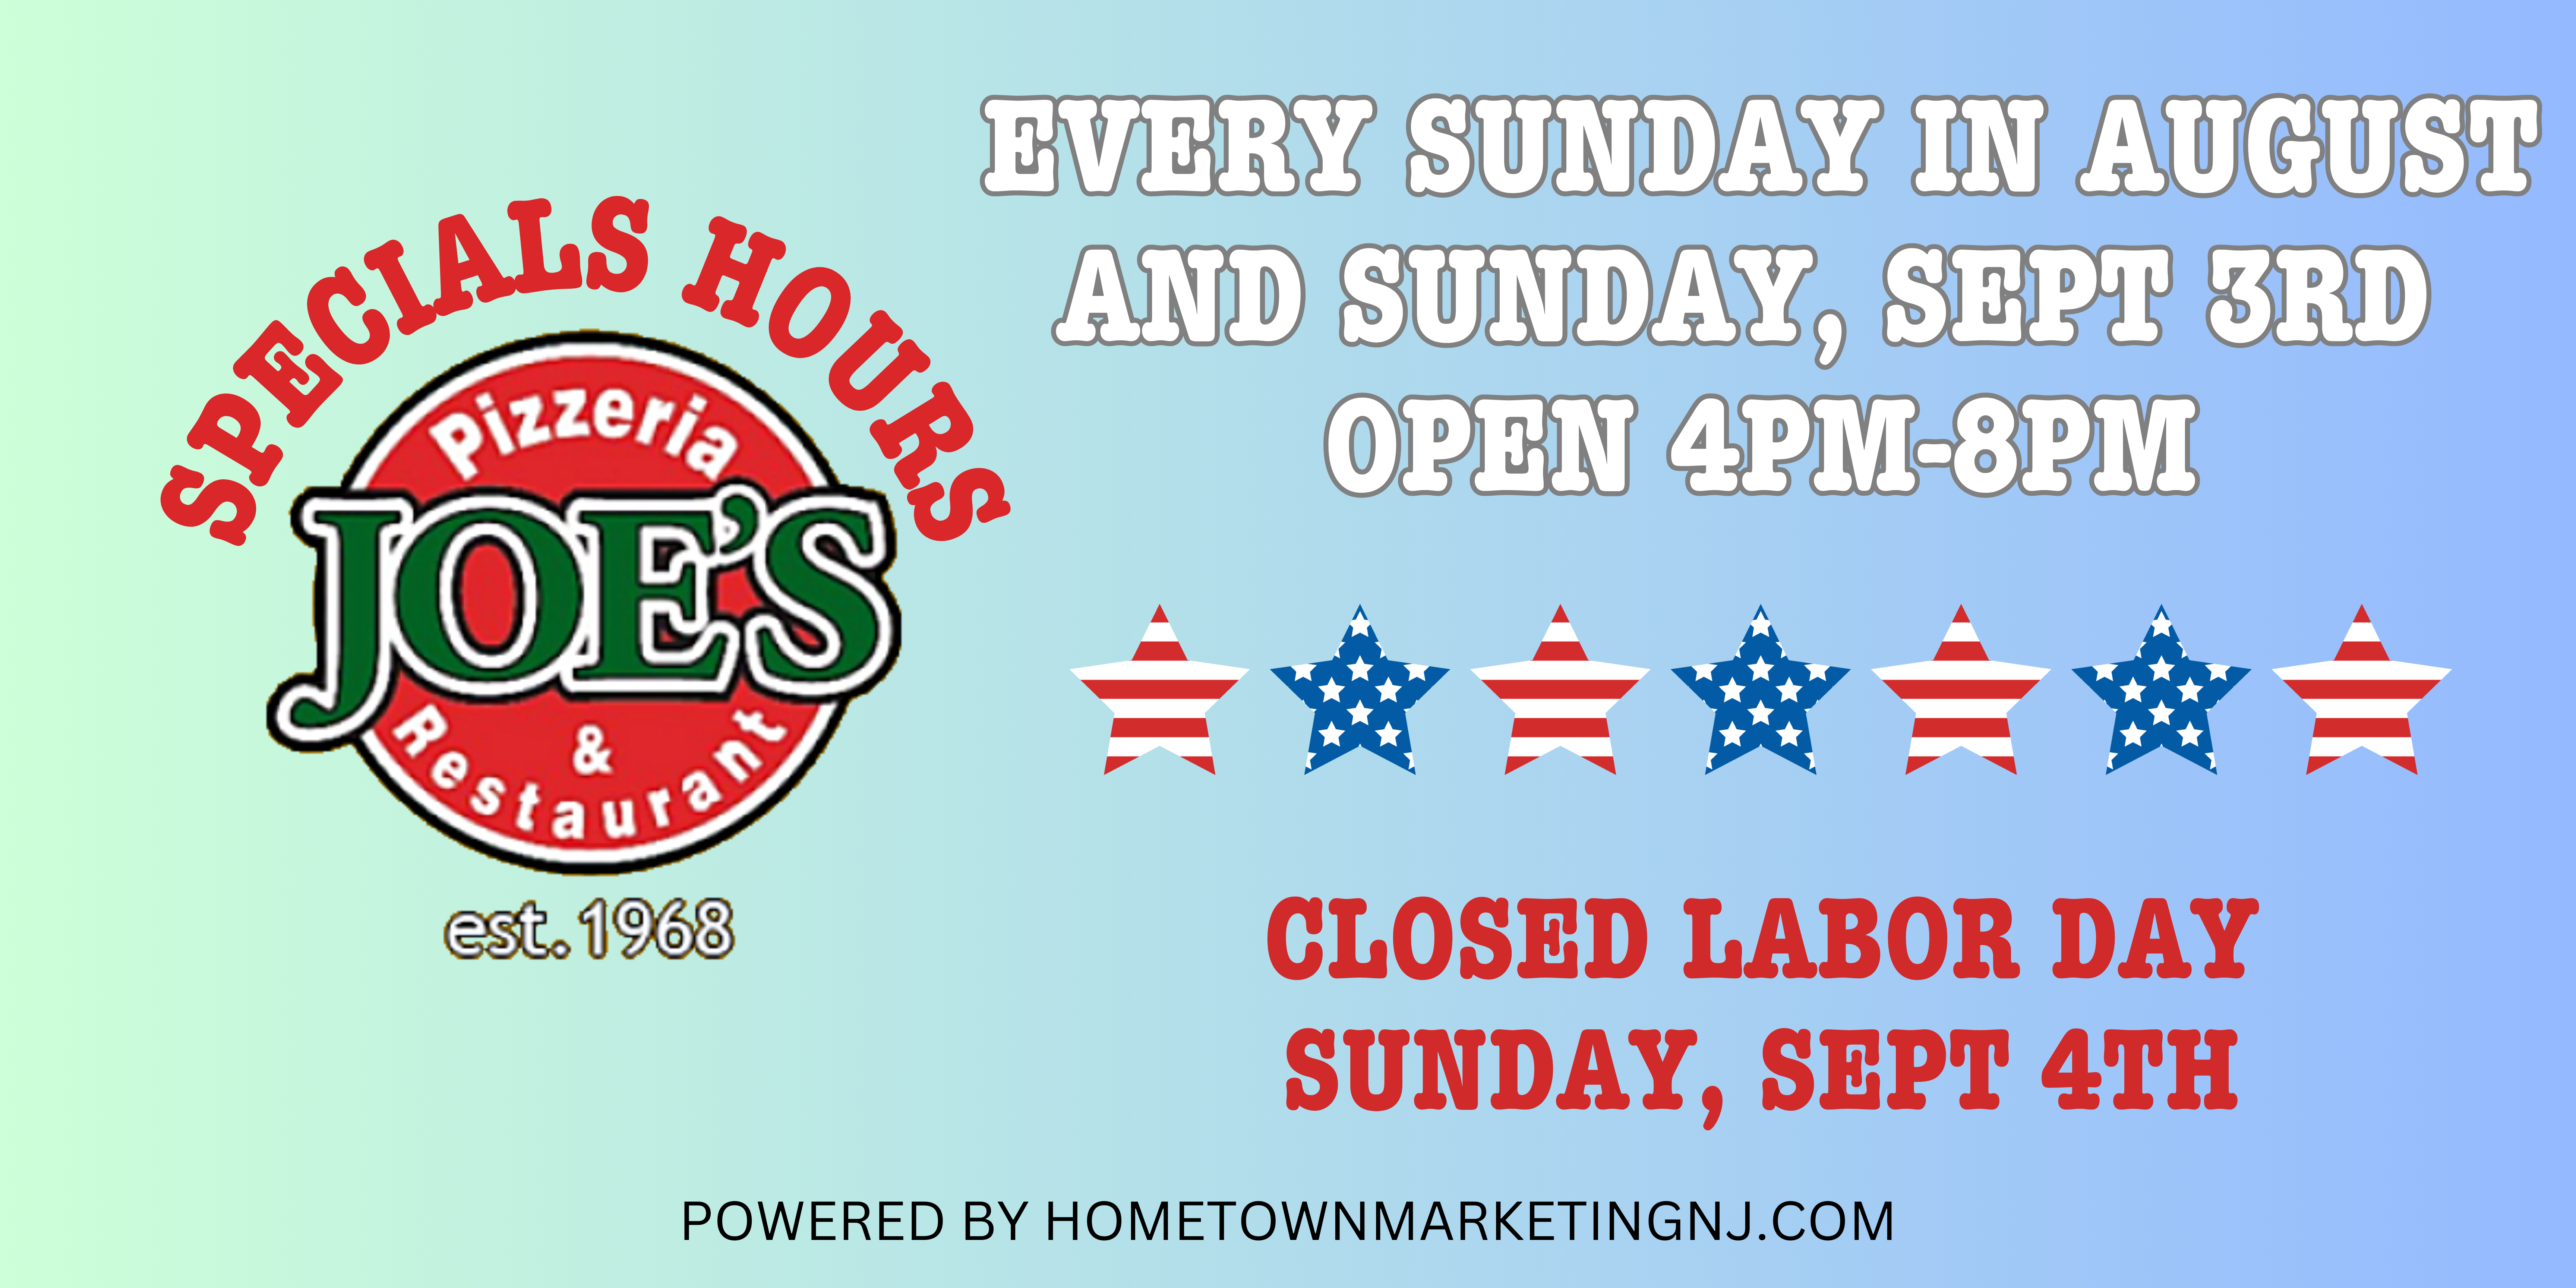 Joe's Pizza Specials hours aug and sept 3rd